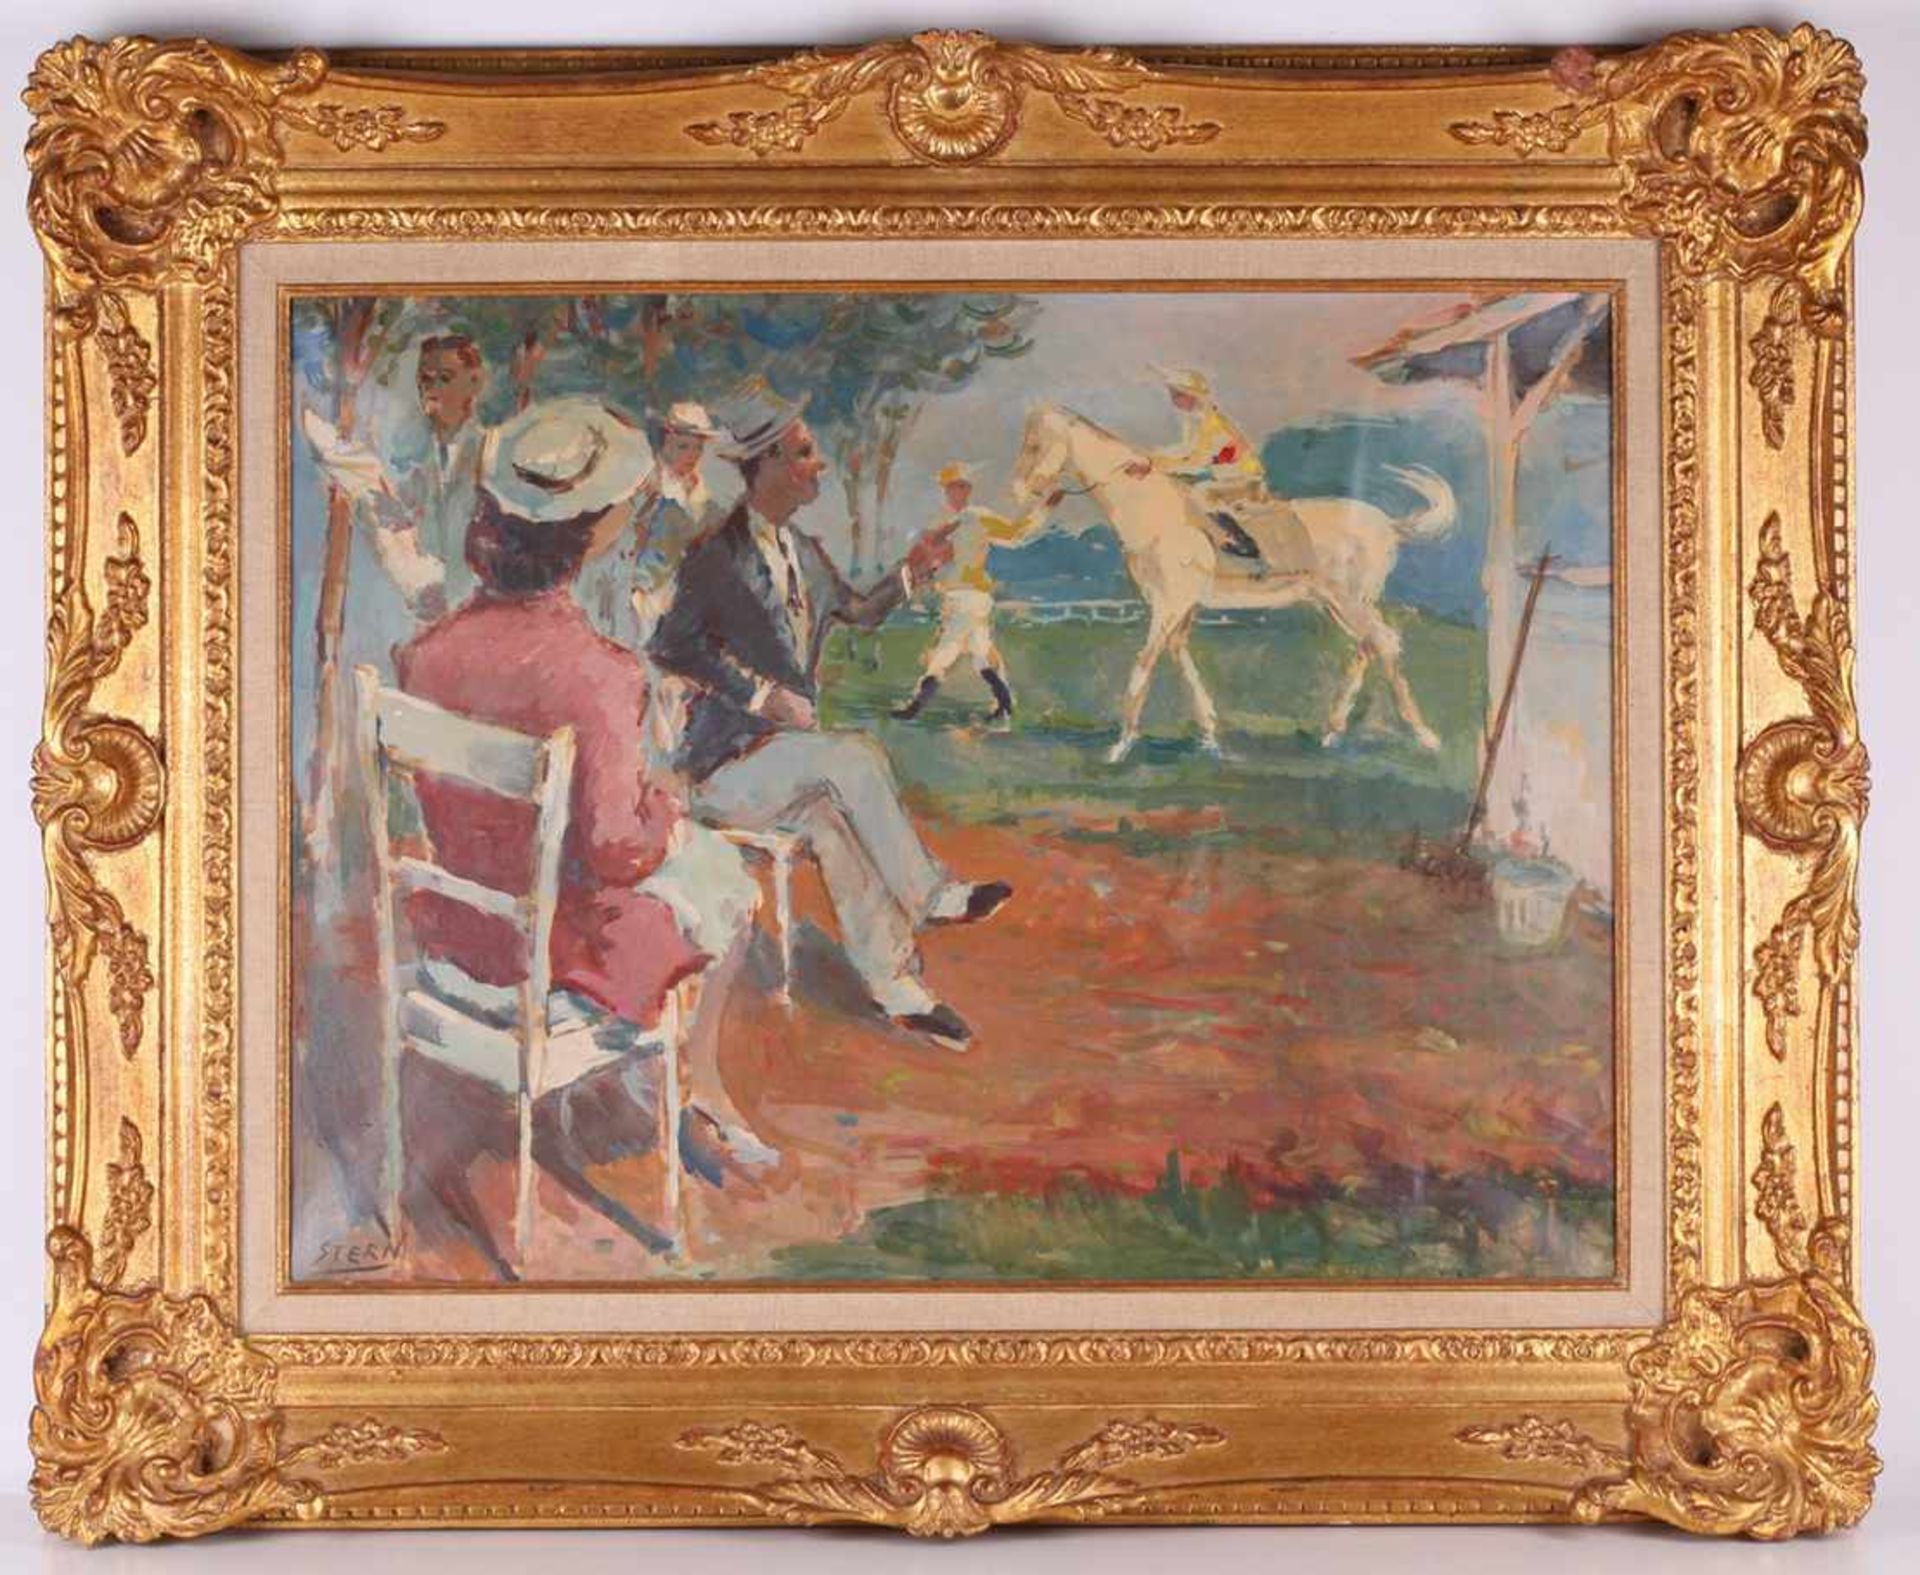 Stern, Ernst. Horse race. [Early XX century]. Oil on canvas. 46x61 cm.- - -15.00 % buyer's premium - Image 2 of 3